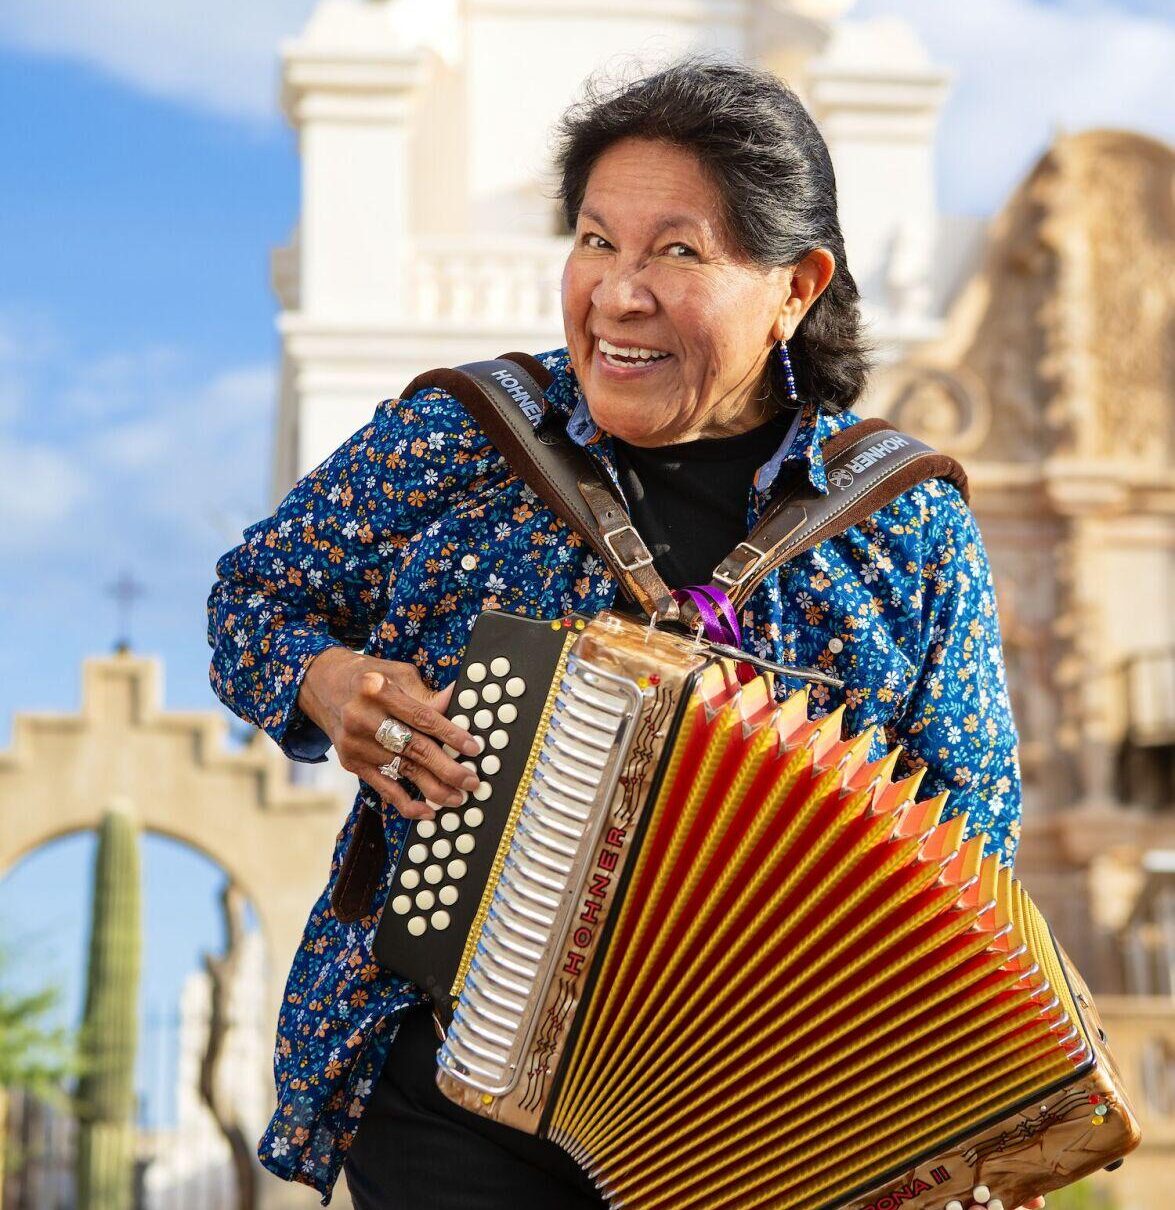 A woman playing an accordion in front of a church.